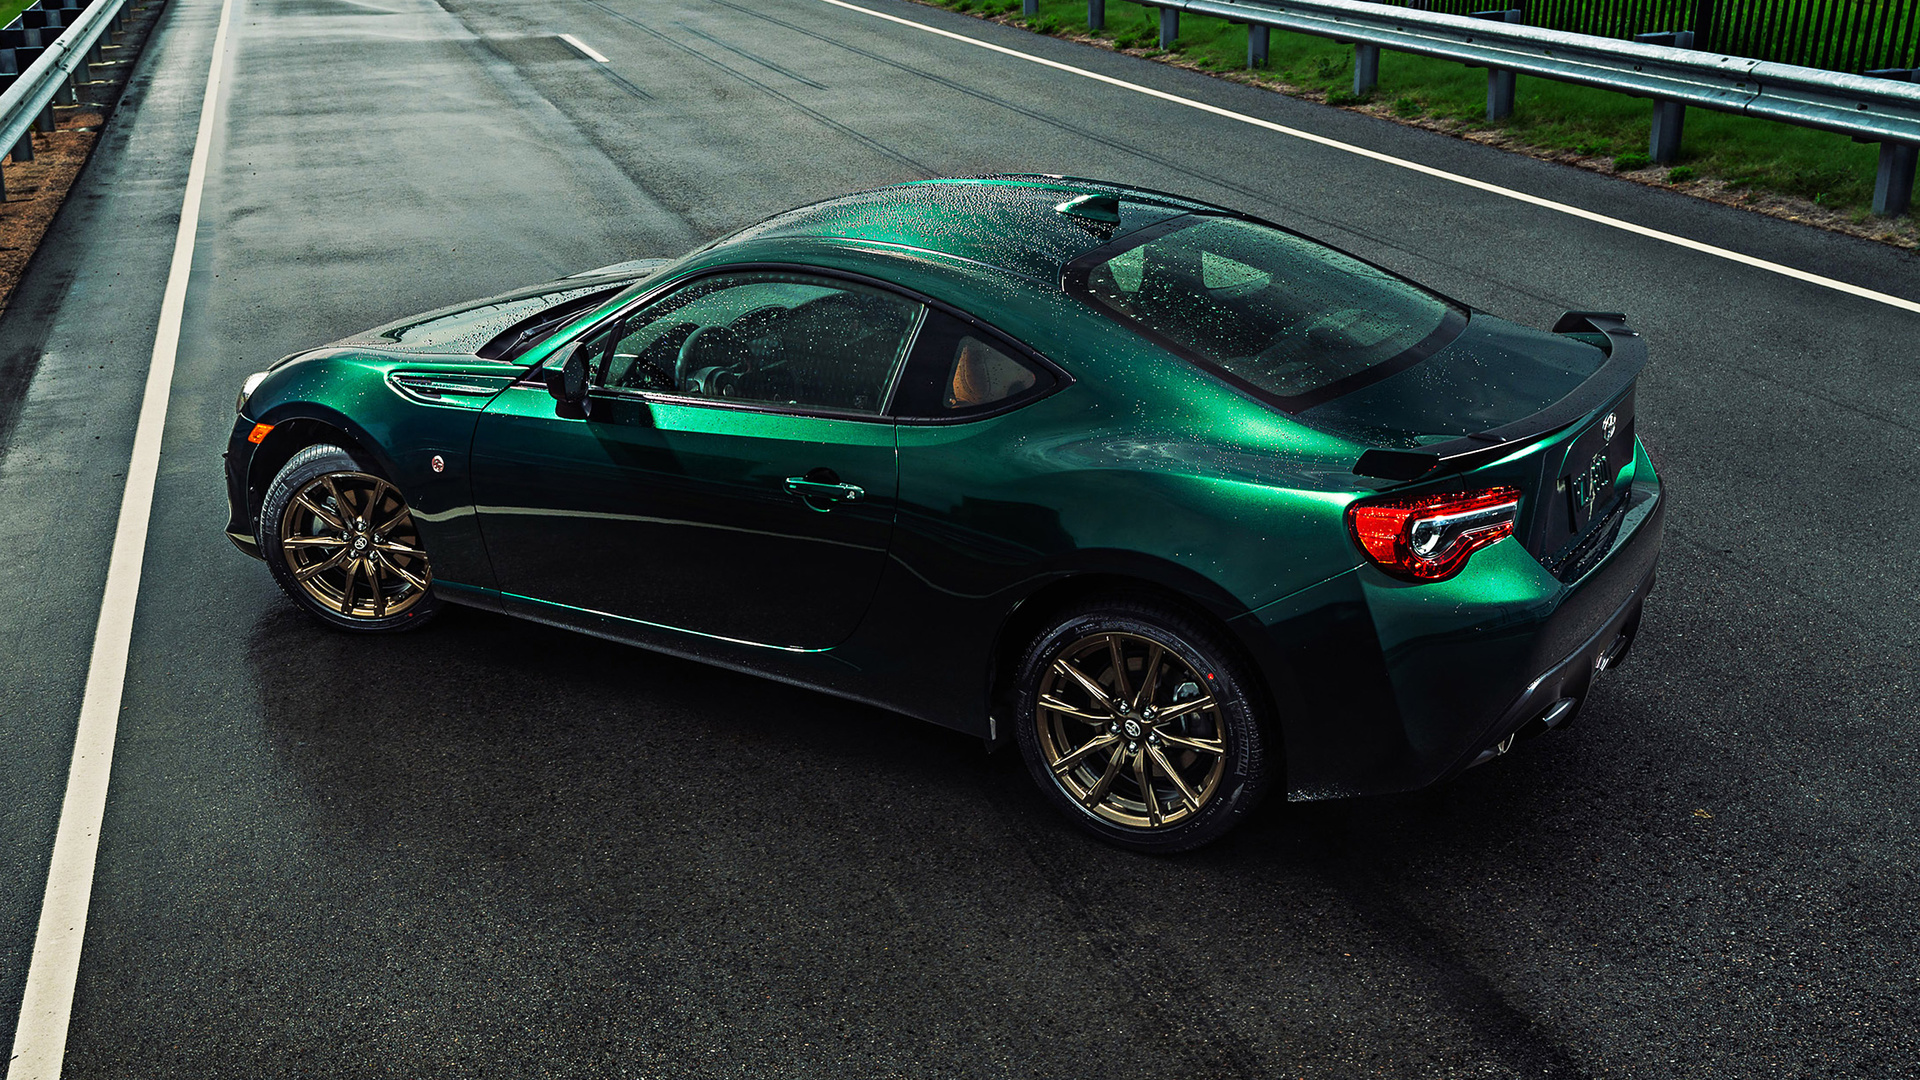 2020, toyota, 86, hakone, edition, rear view, exterior, green, sports coupe, gt86